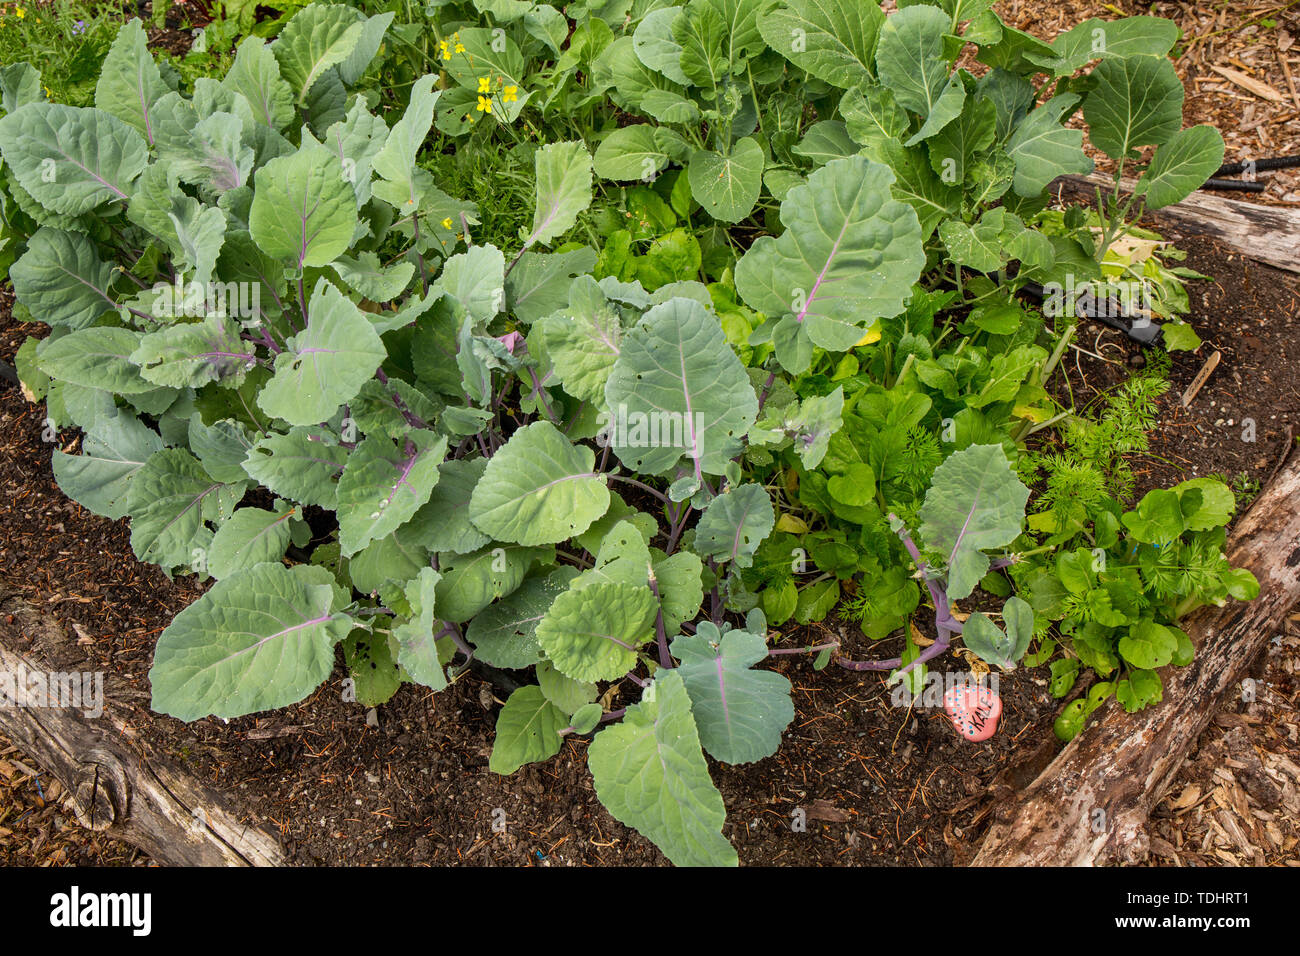 Kale, bok choi and collard greens growing in a garden in Issaquah, Washington, USA Stock Photo